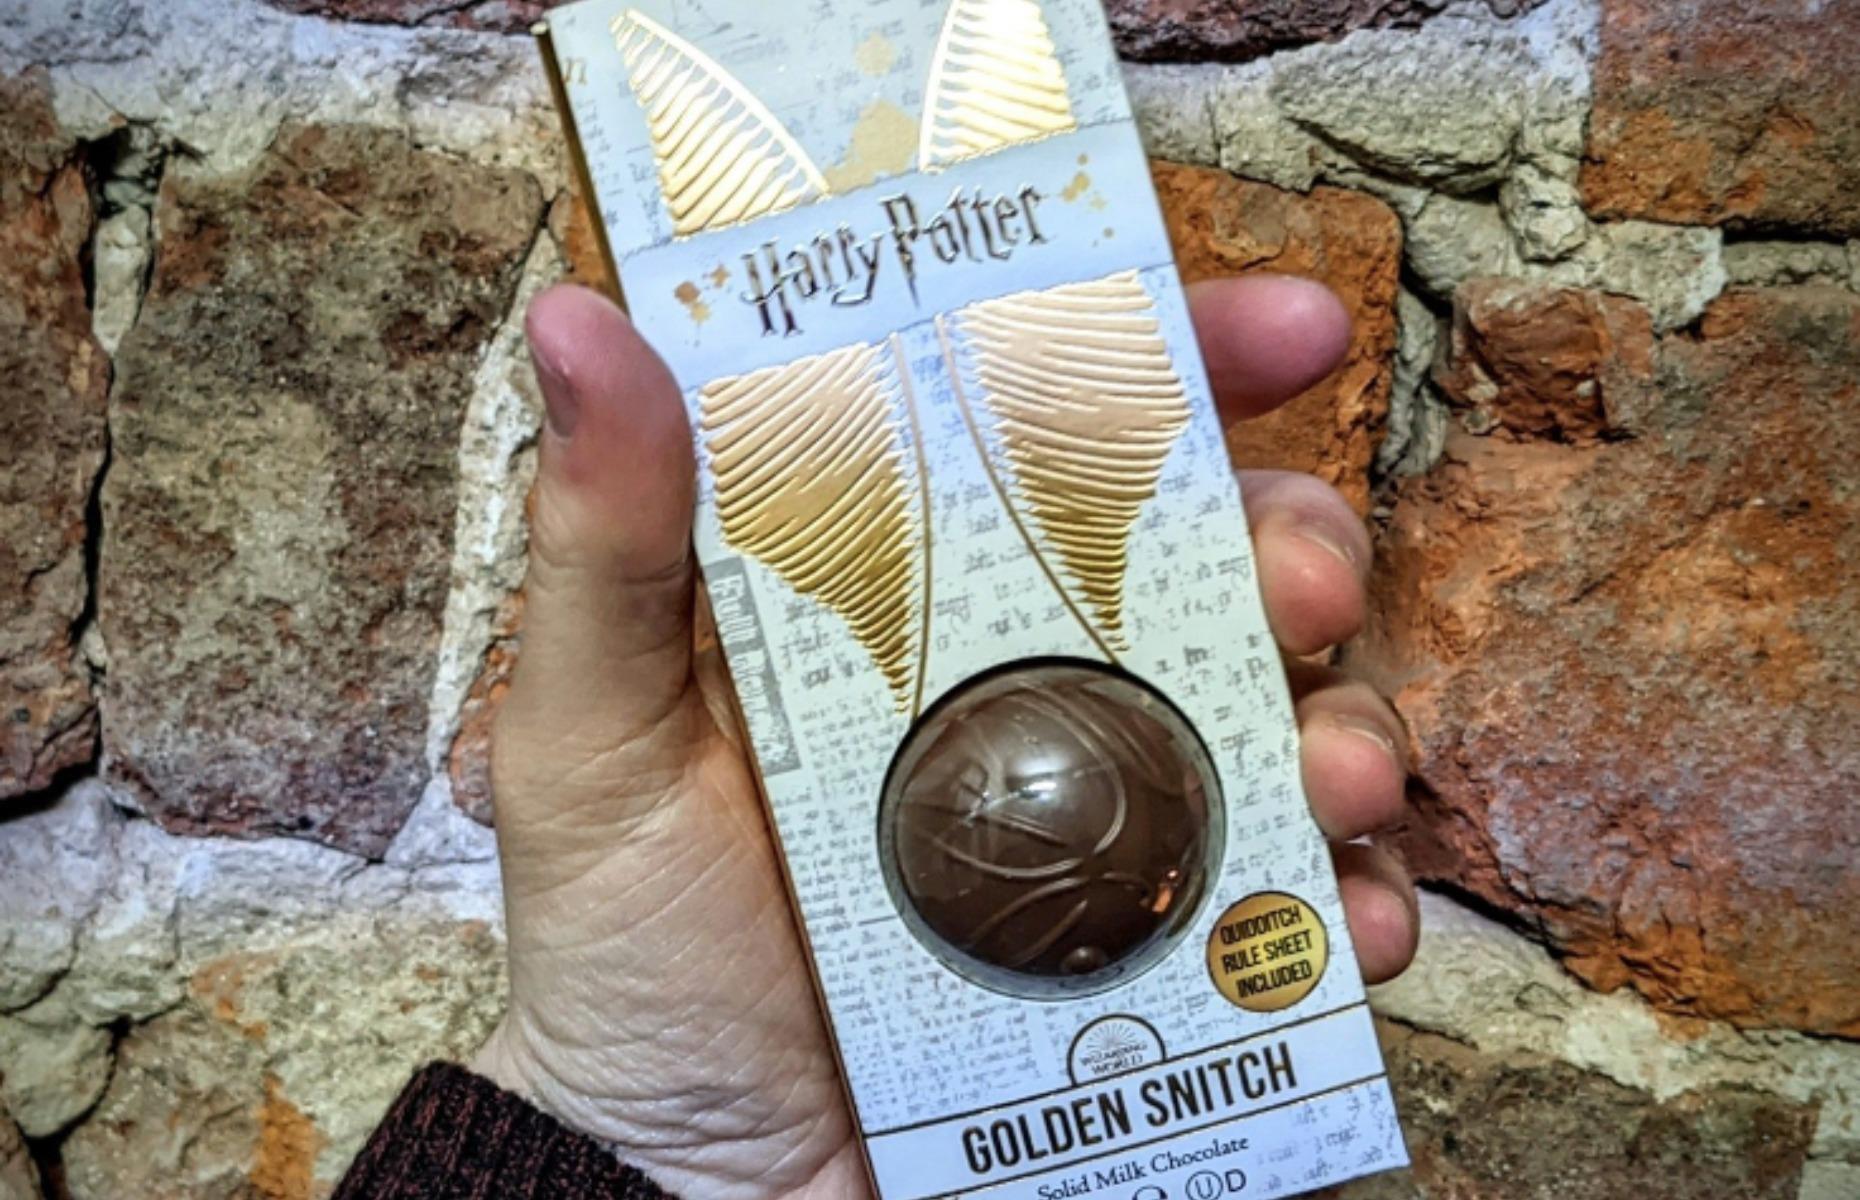 <p>Have you ever dreamt of catching your very own Golden Snitch? Well, now’s your chance. This magical gift shop in York sells a solid milk chocolate sphere moulded to resemble the nifty gleaming ball. It comes with a Quidditch rules sheet too, making it a lovely keepsake for a Harry Potter fan.</p>